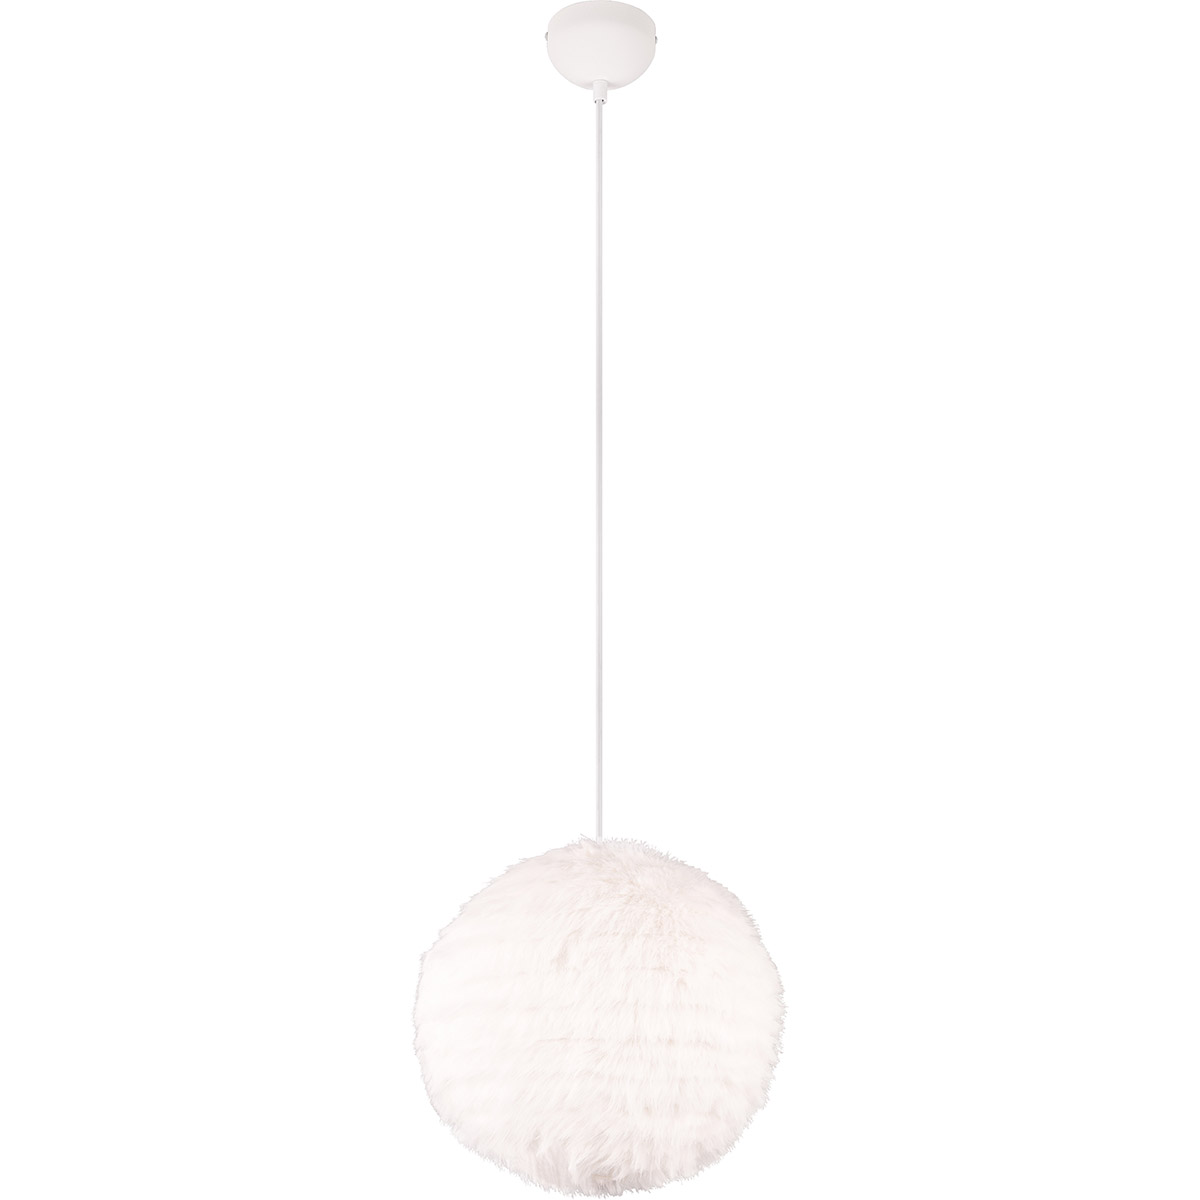 BES LED LED Hanglamp - Trion Fluffy - E27 Fitting - 1-lichts - Rond - Taupe - Synthetik Pluche